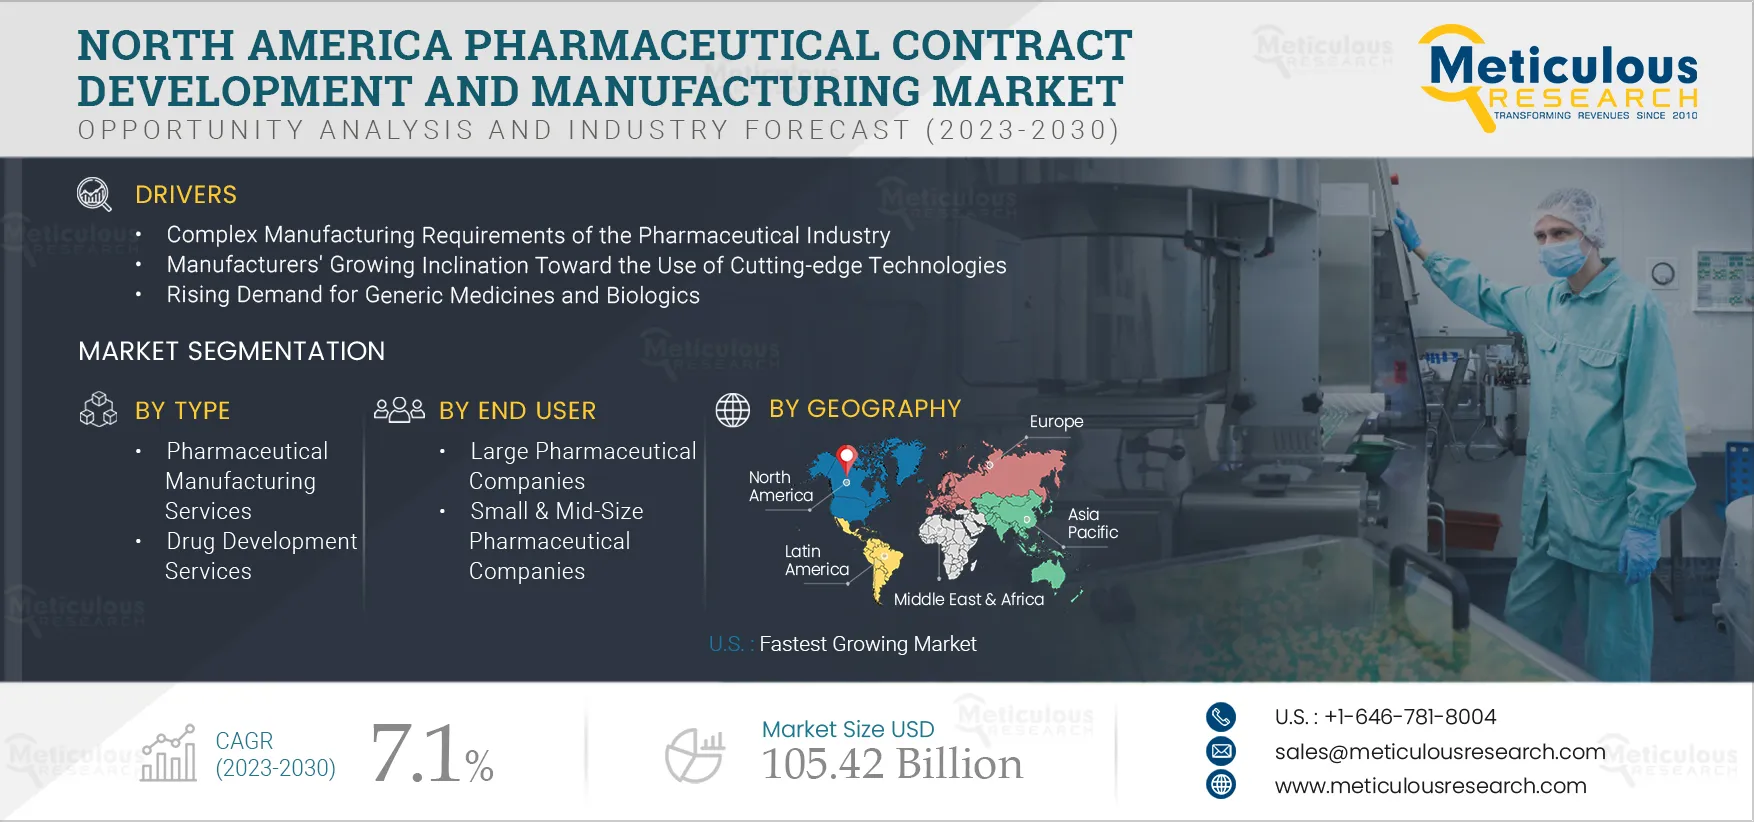 North America Pharmaceutical Contract Development and Manufacturing Market